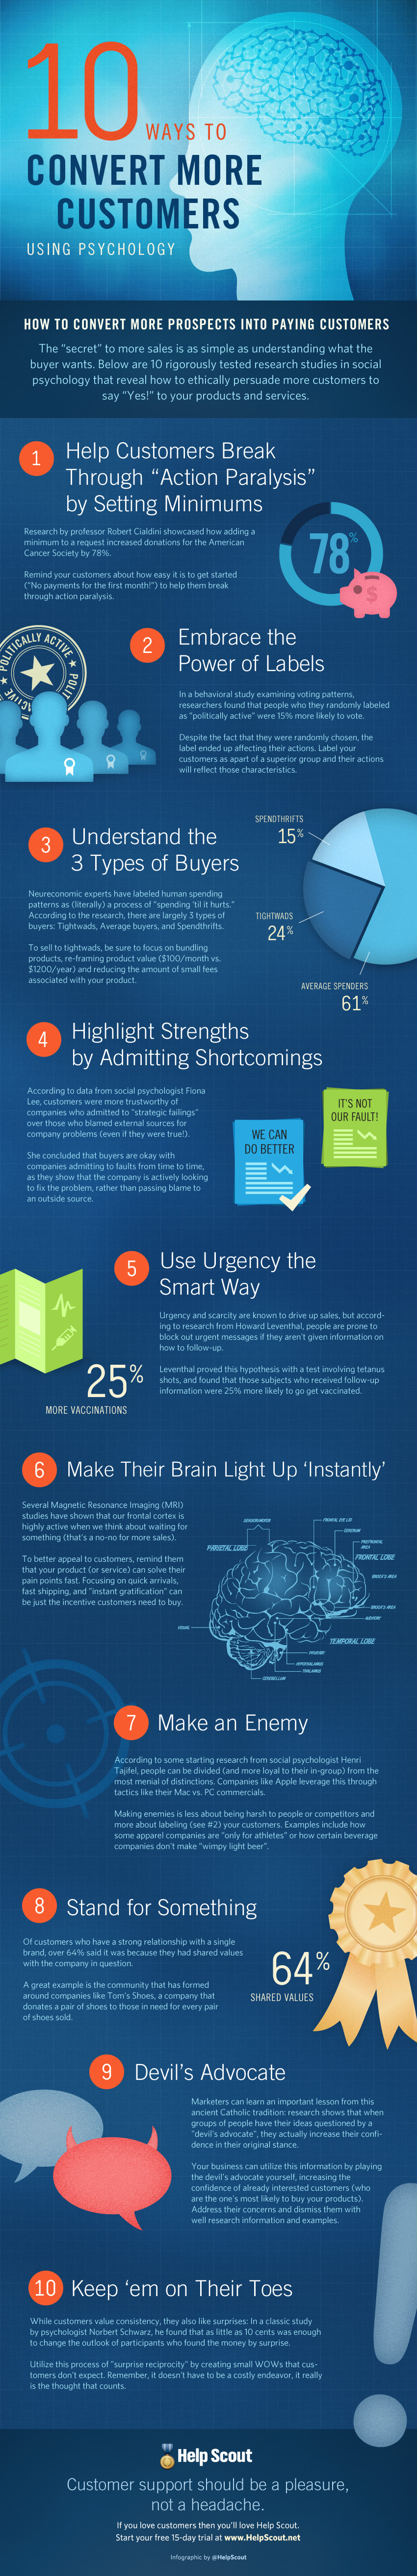 [Infographic] 10 Ways to Convert More Customers Using Psychology